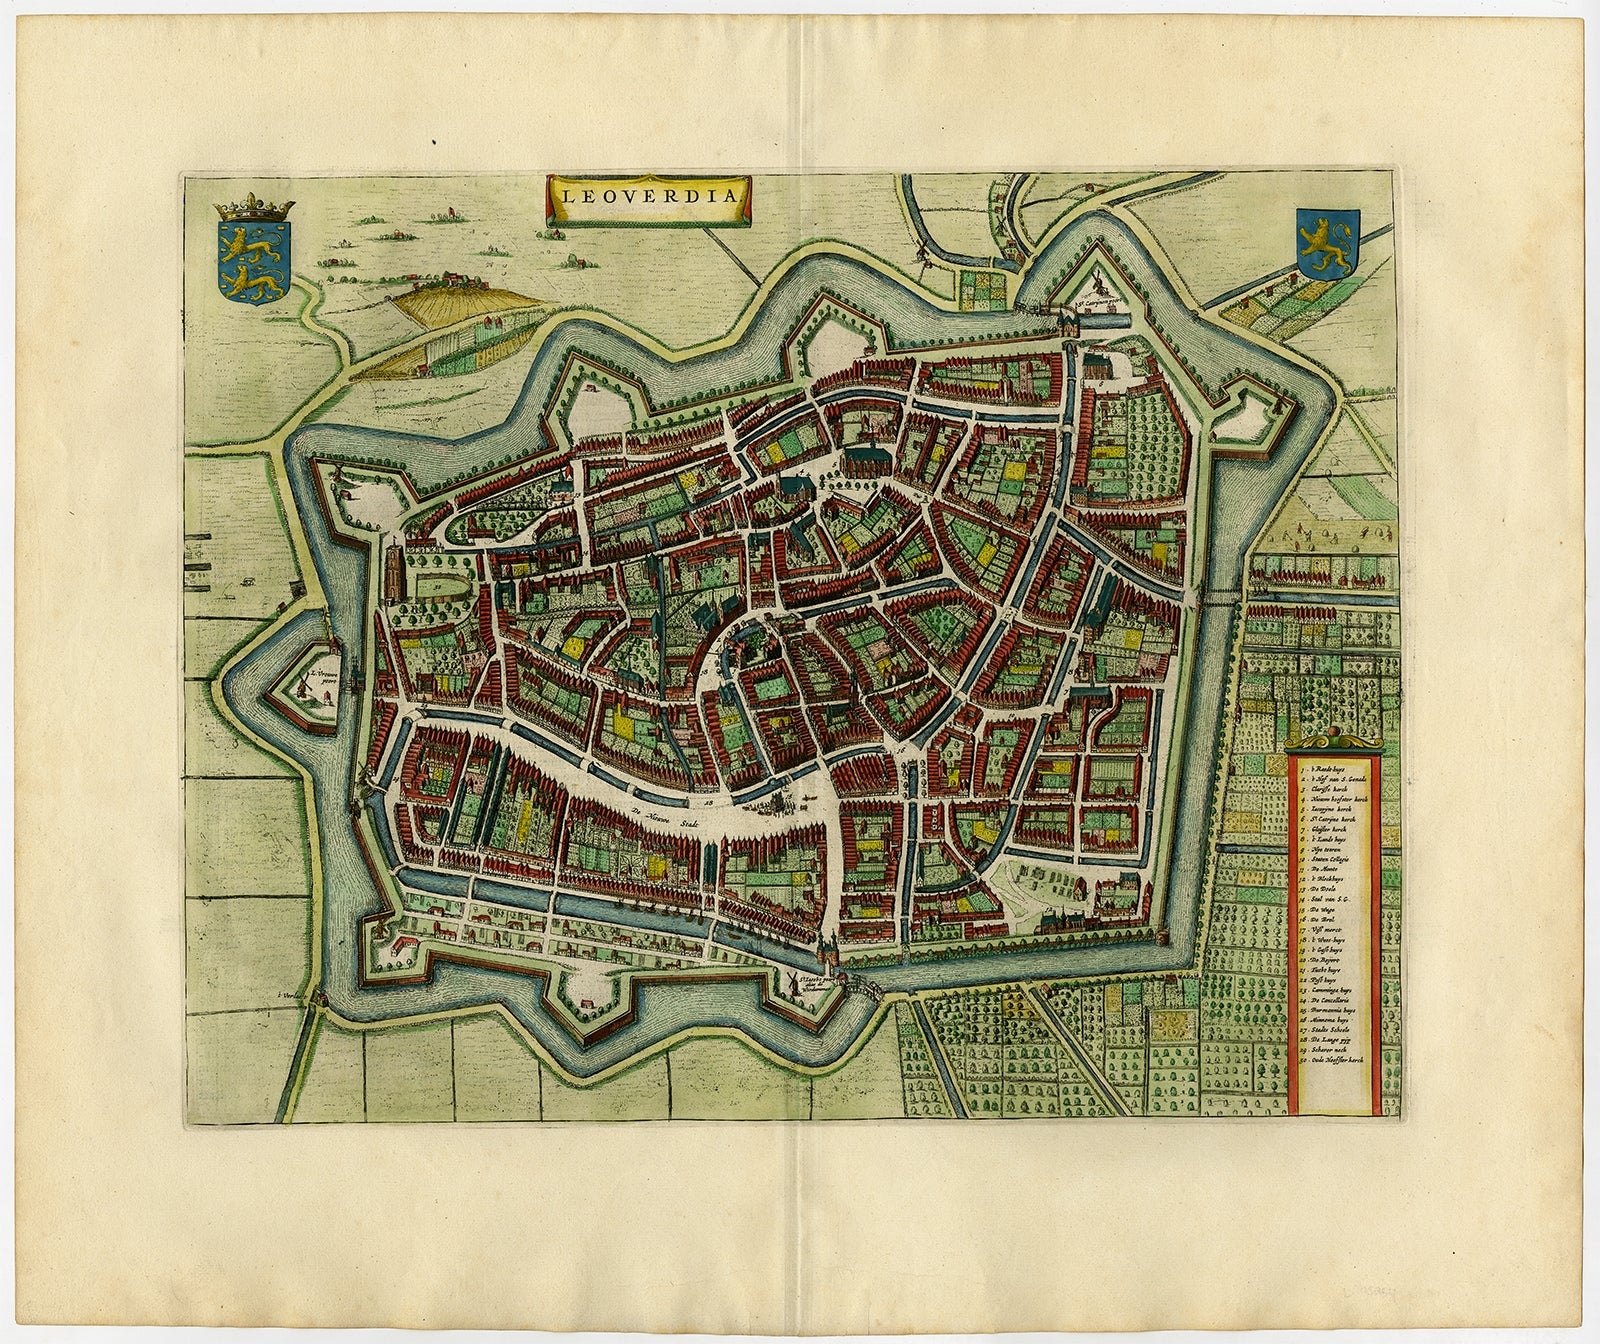 Antique print, titled: 'Leoverdia.' 

This map shows Leoverdia (Leeuwarden). Bird's-eye view plan of Leeuwarden in The Netherlands, with key to locations and coats of arms. Text in Dutch on verso. This plan originates from the famous city Atlas: